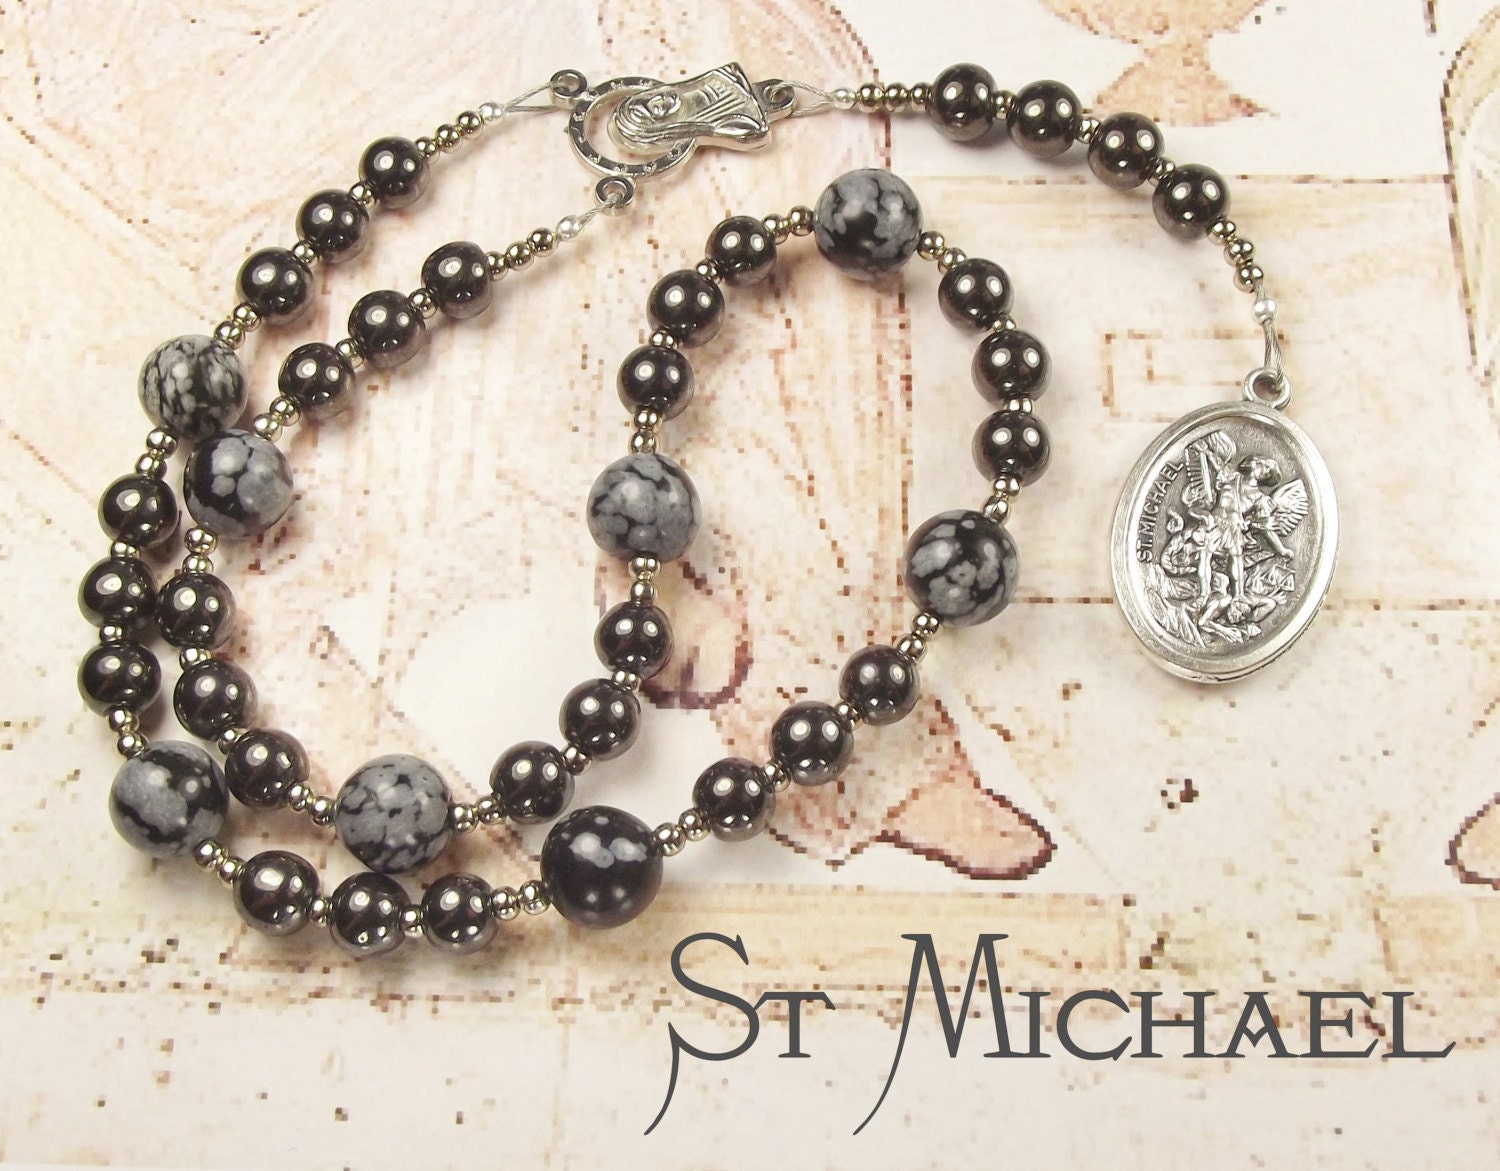 St MICHAEL CHAPLET with Haematite and Snowflake Obsidian beads